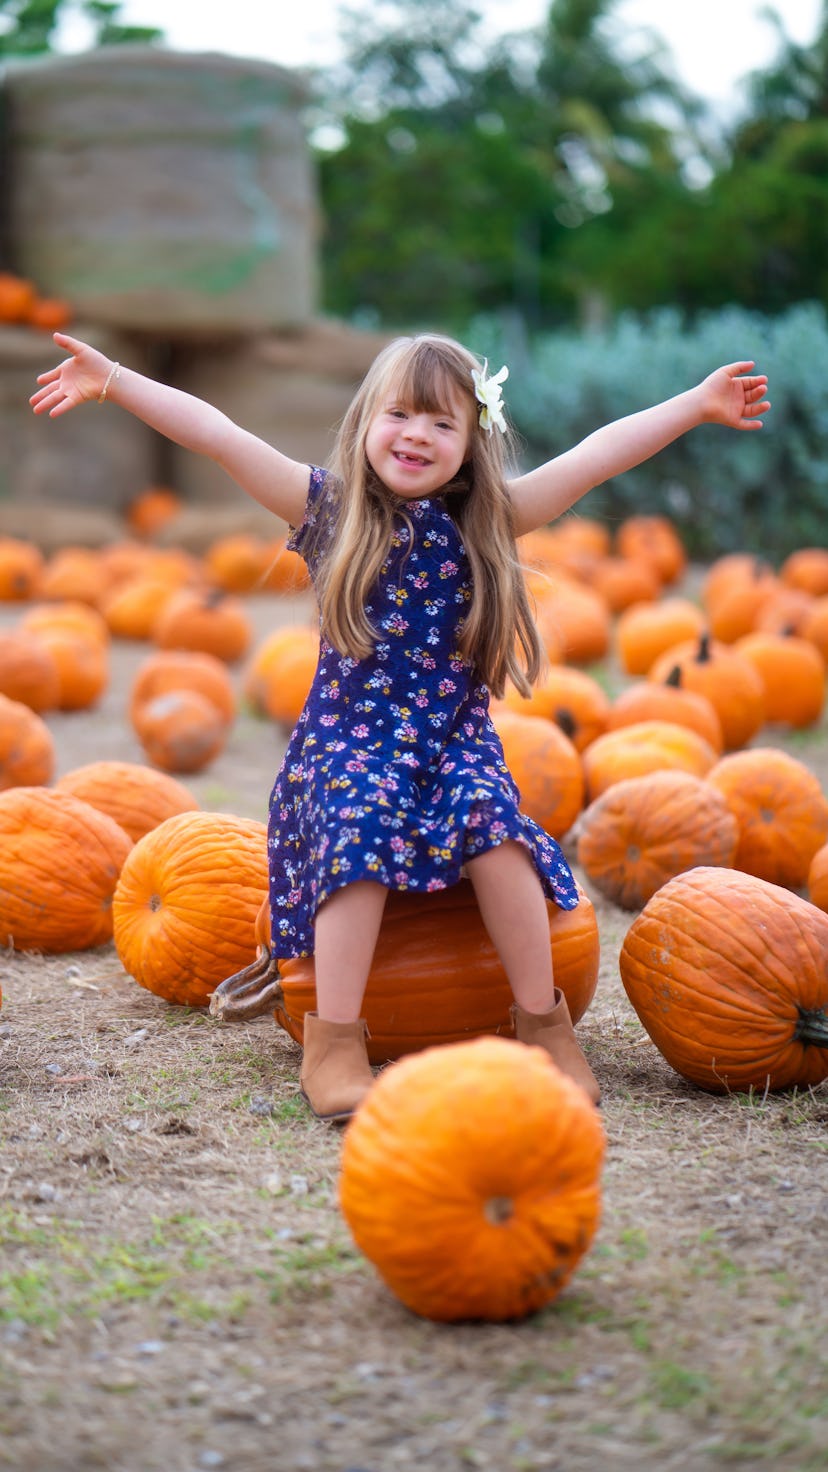 A little girl sits on a pumpkin in a pumpkin patch with her arms raised, excited about pumpkin patch...